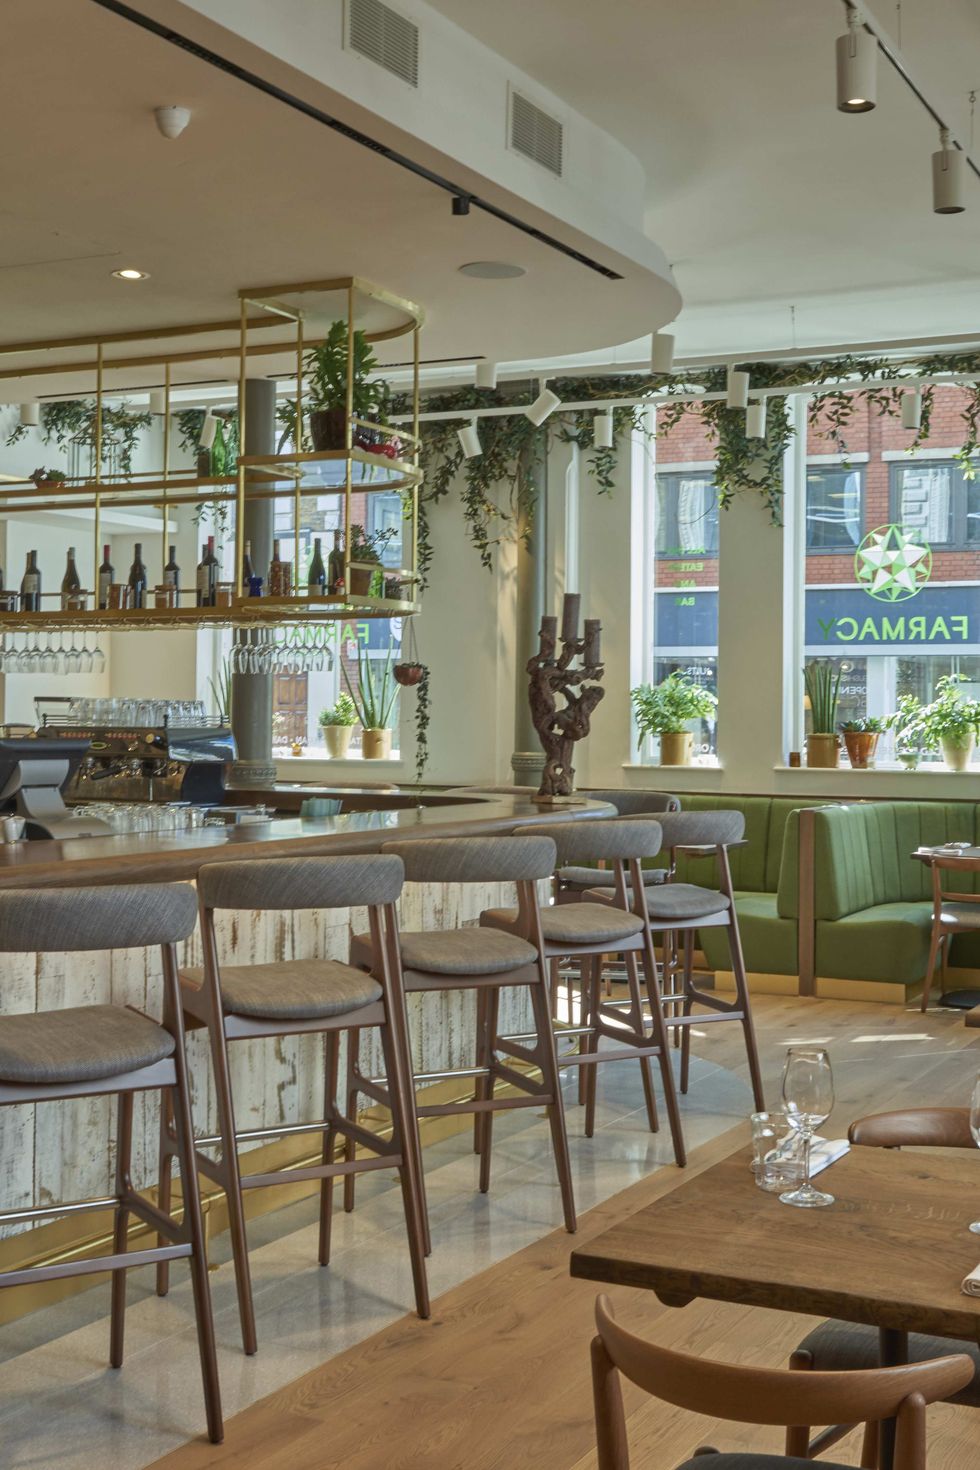 <p>Summer is threatening to appear and if, like us, you're on a bikini body mission then restaurant menus can be tricky to navigate. Luckily, Camilla Al Fayed's new Notting Hill restaurant Farmacy boasts a totally plant-based menu that clean eaters and vegans will adore. You'll find plant-based ice cream sundaes, the 'Farmacy Burger' made with millet black beans and mushrooms, and even cocktails which are mixed with ingredients known for their medicinal benefits. <em>Visit <a href="http://farmacylondon.com">farmacylondon.com</a></em></p>  <p><em>Image courtesy of Farmacy</em></p>